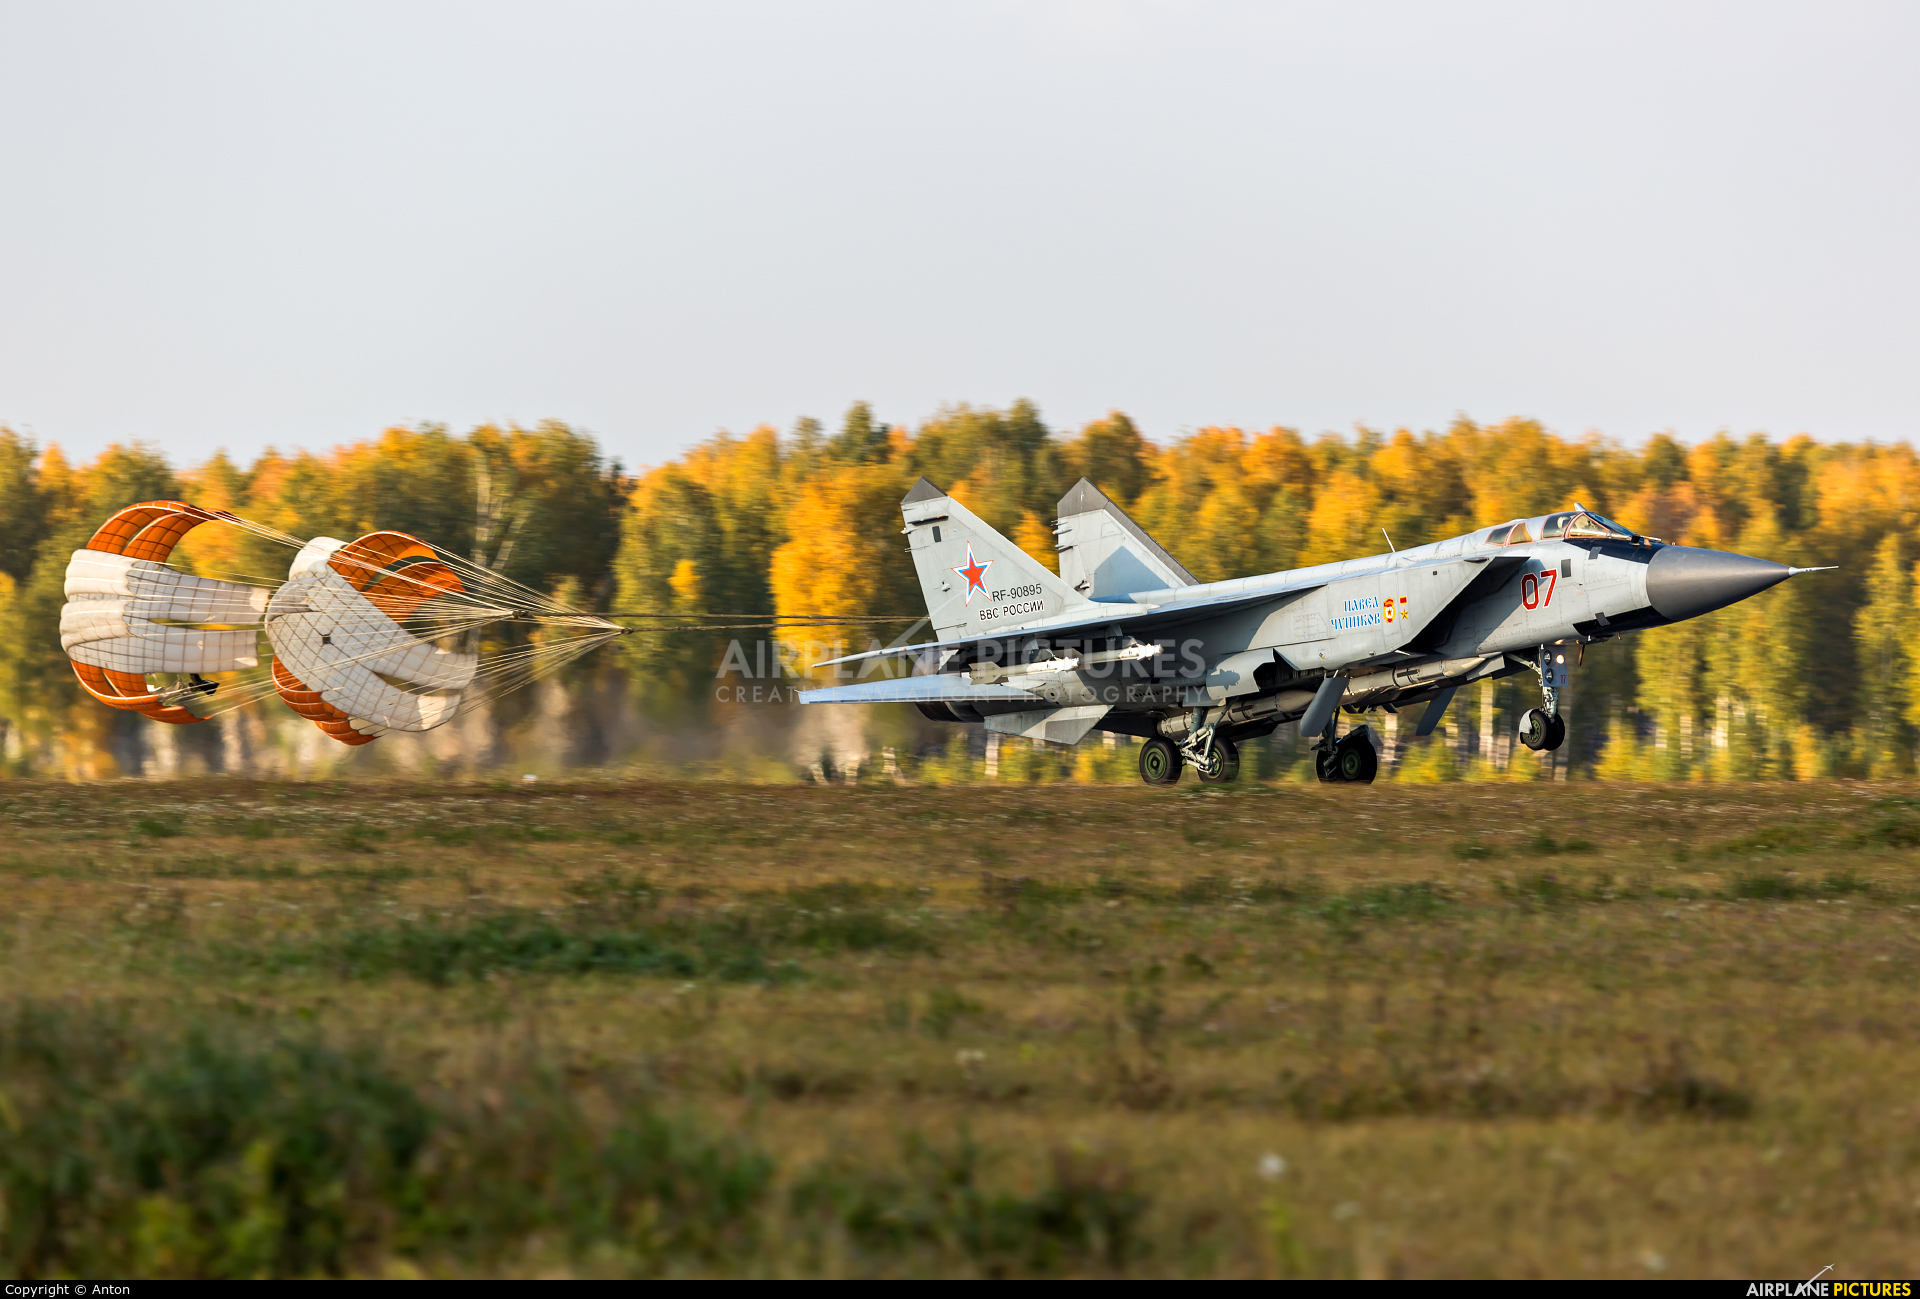 Russia - Air Force 07 aircraft at Undisclosed Location